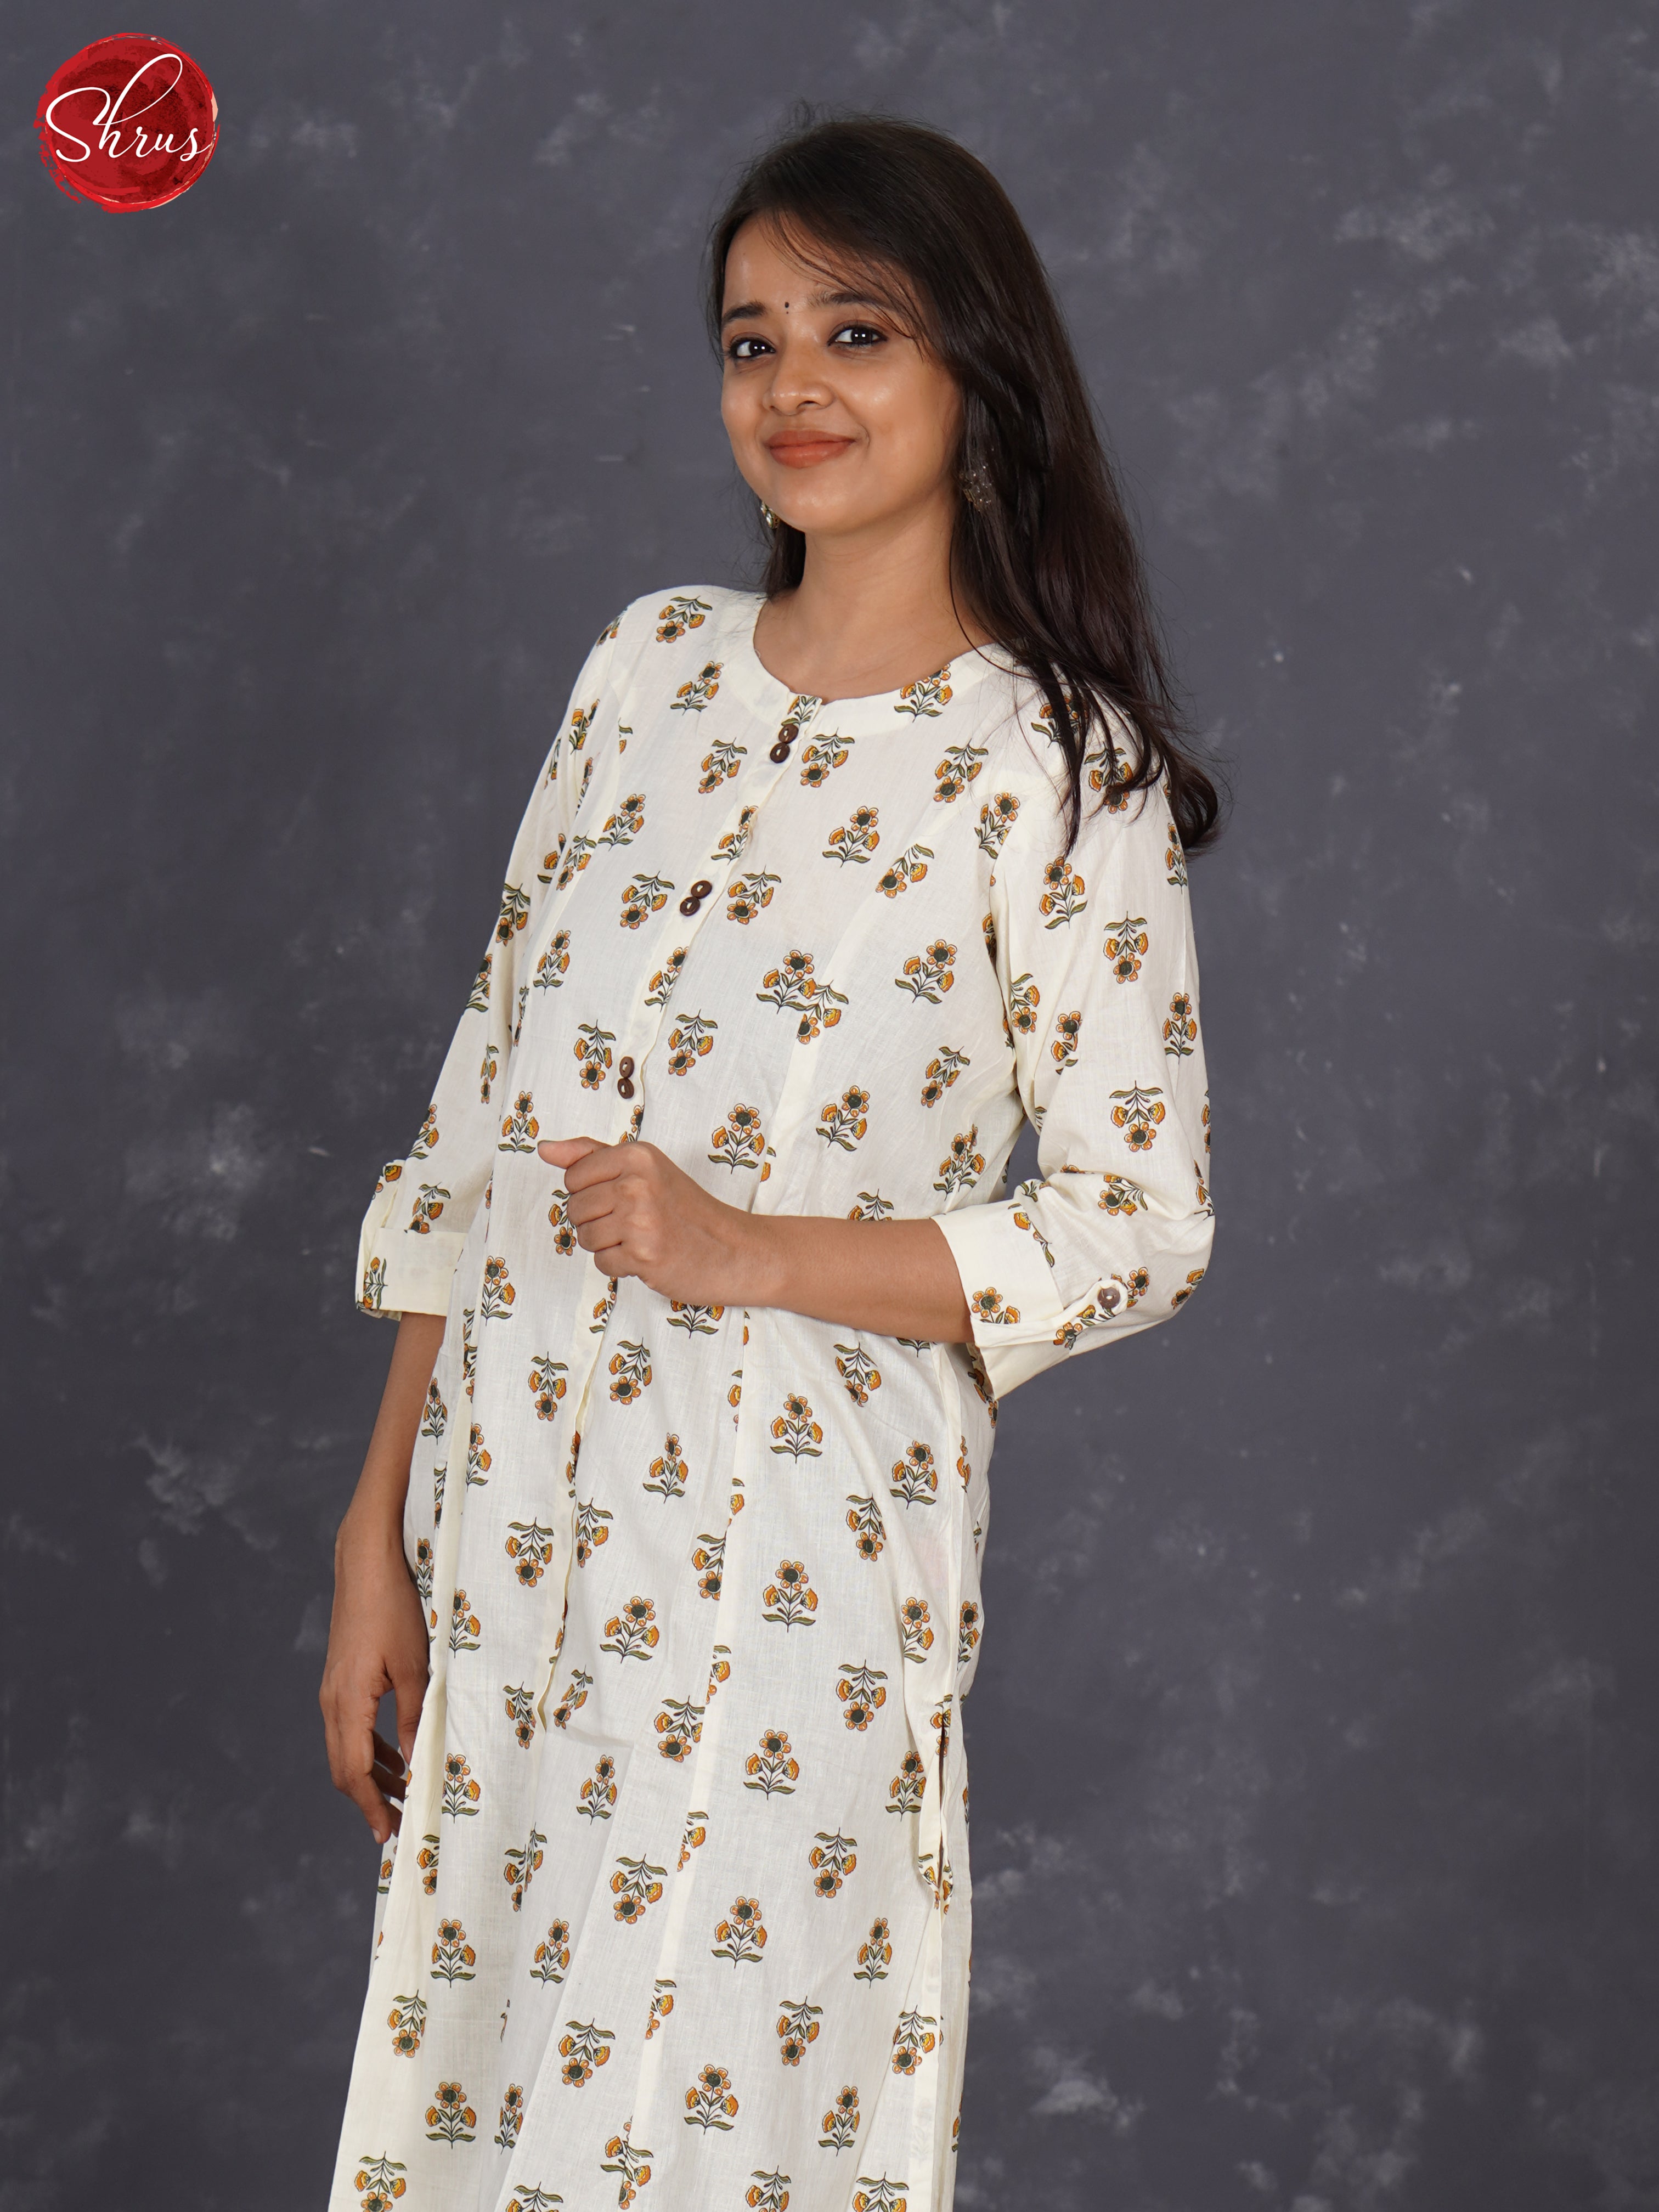 White - Readymade kurti top with floral print - Shop on ShrusEternity.com